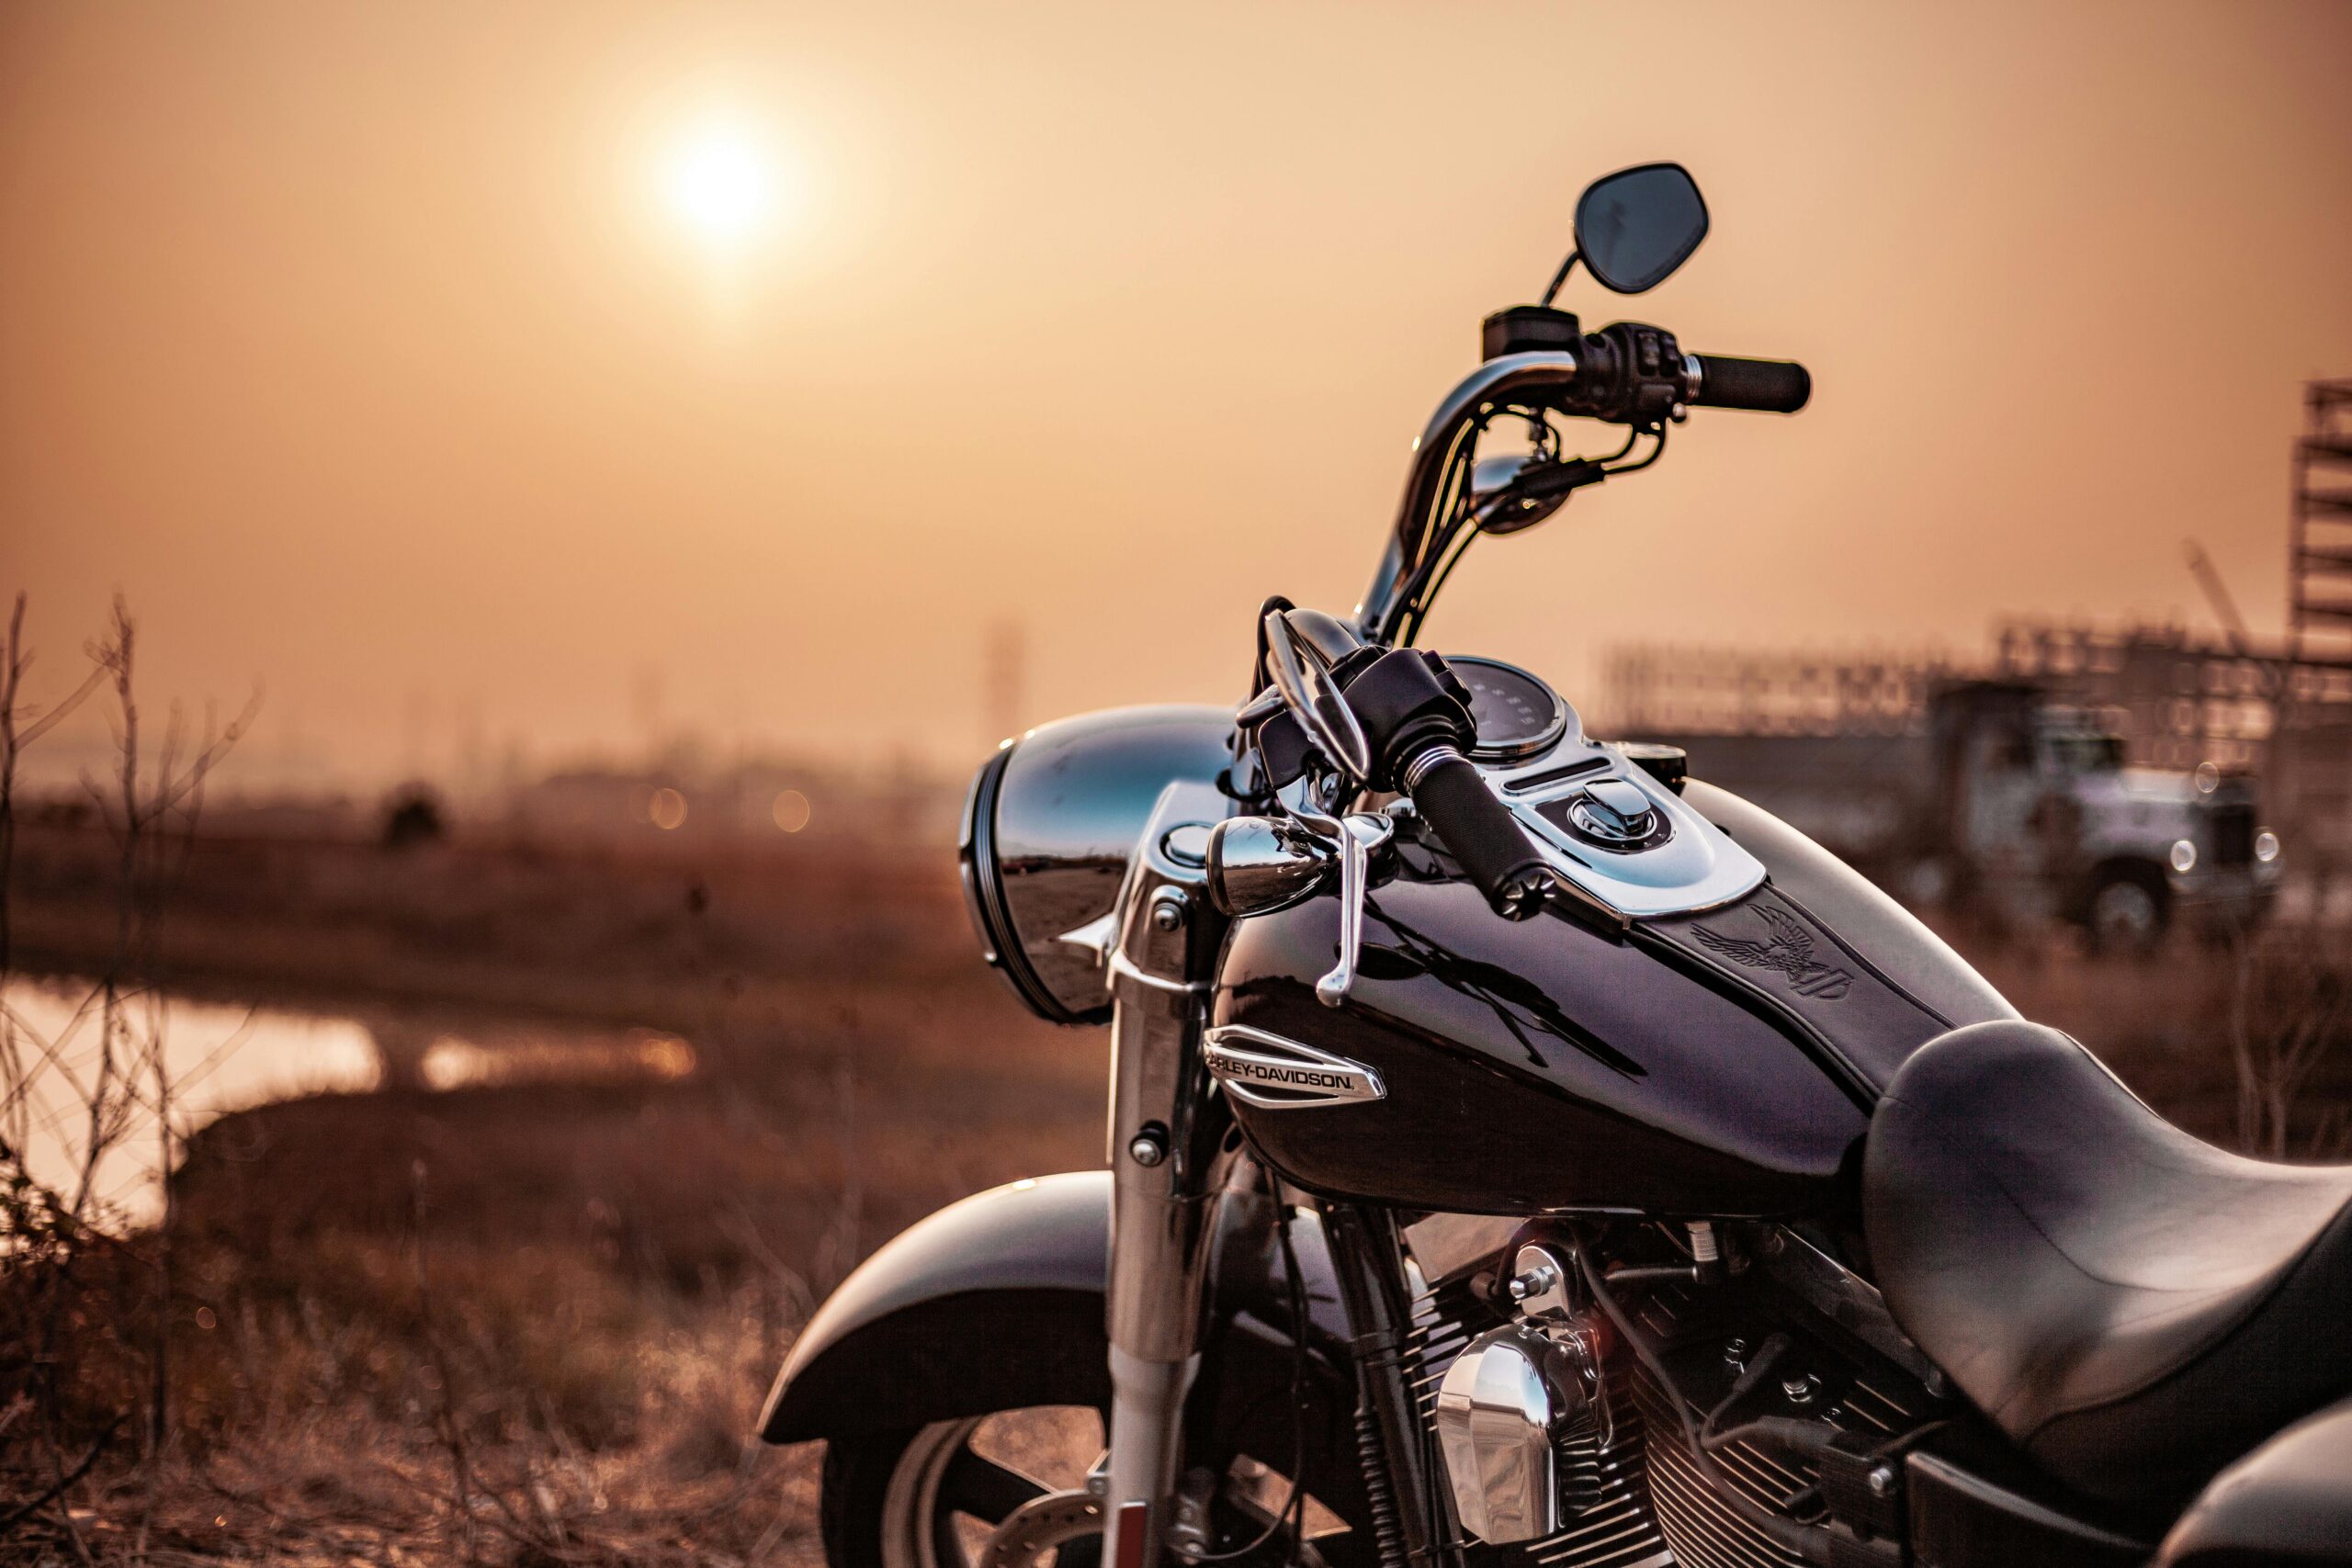 do motorcycles need insurance in florida